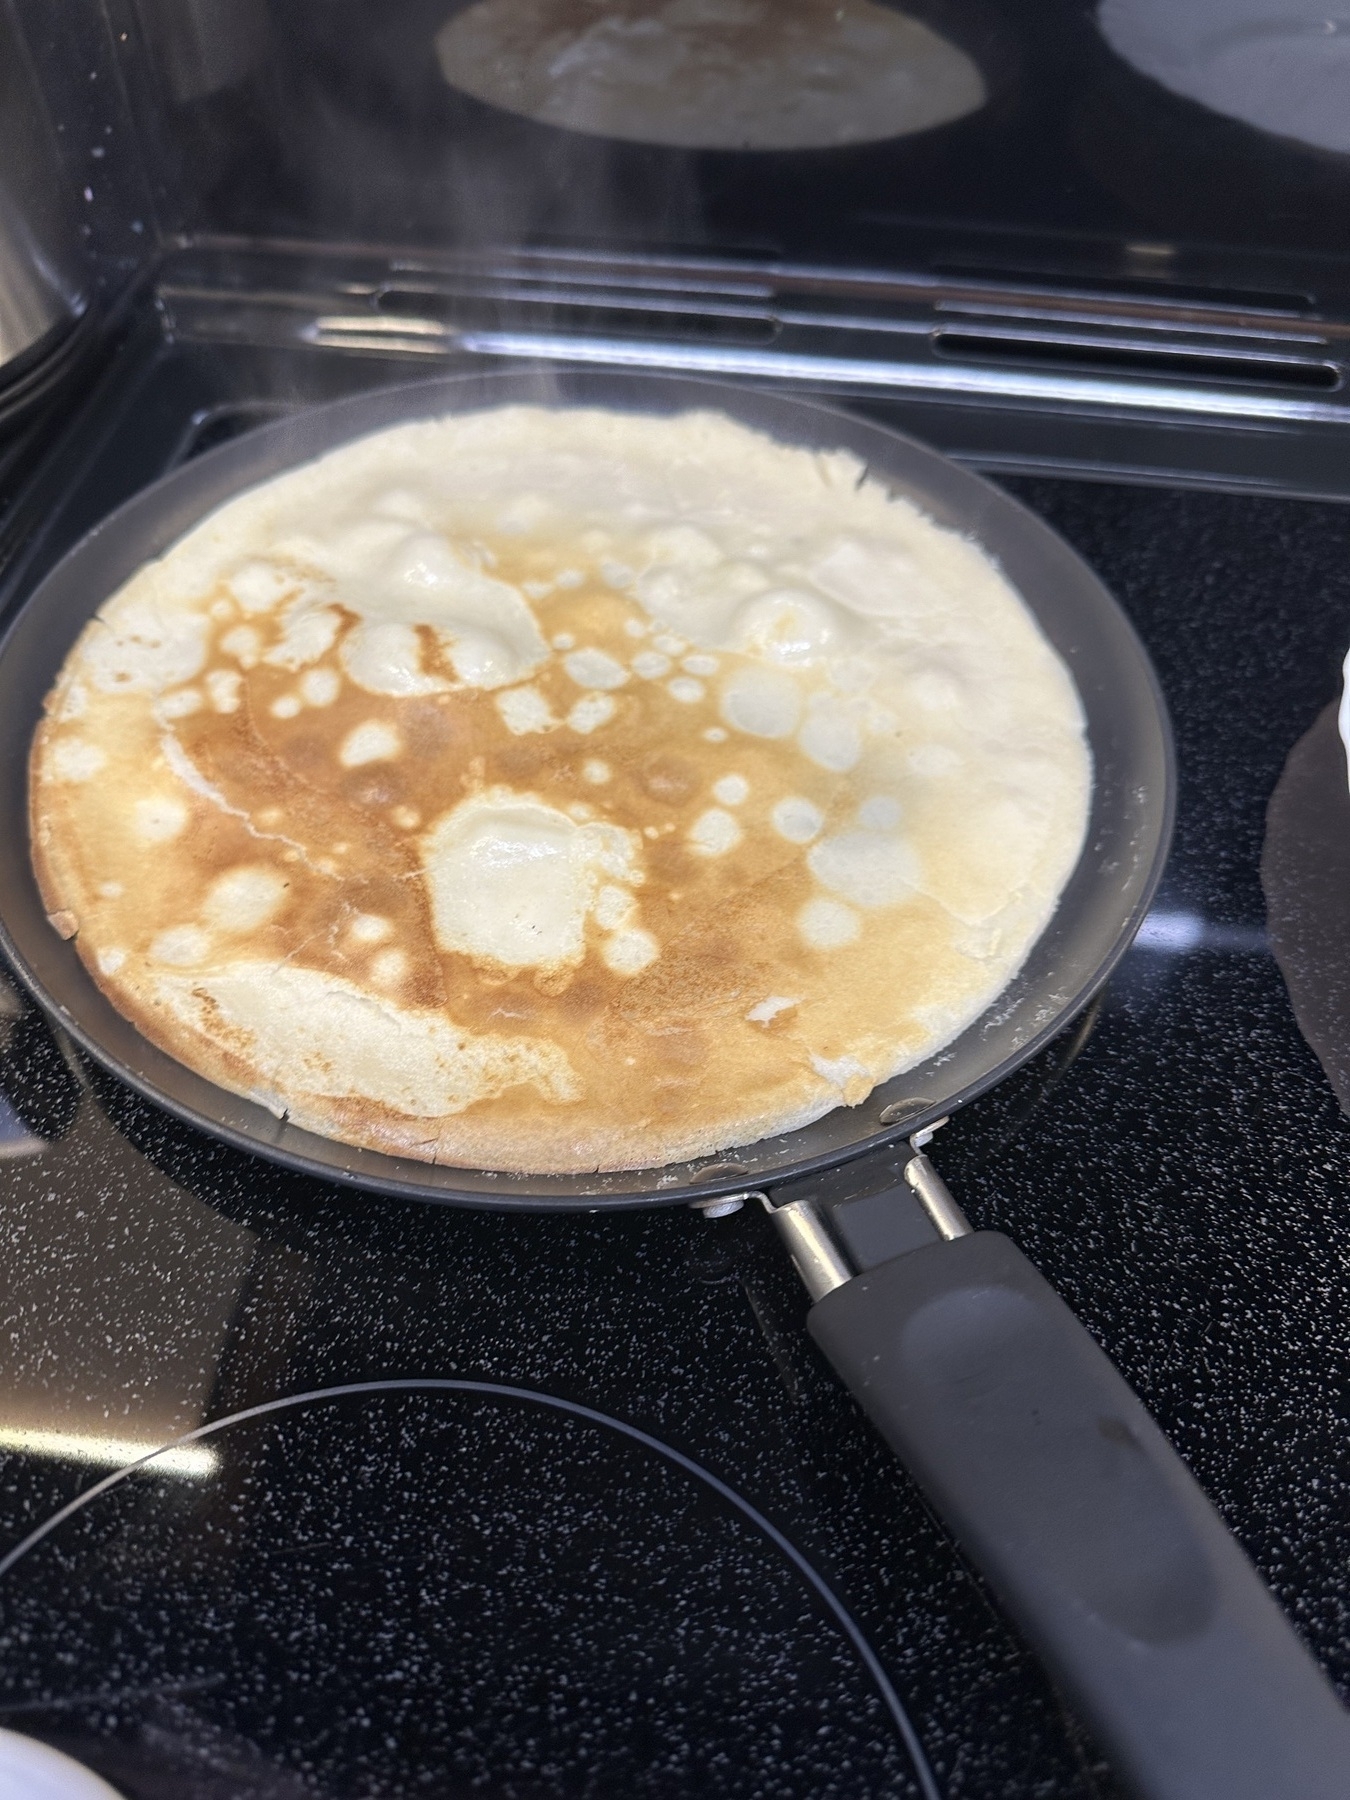 Crepe like pancake in a pan on the stove